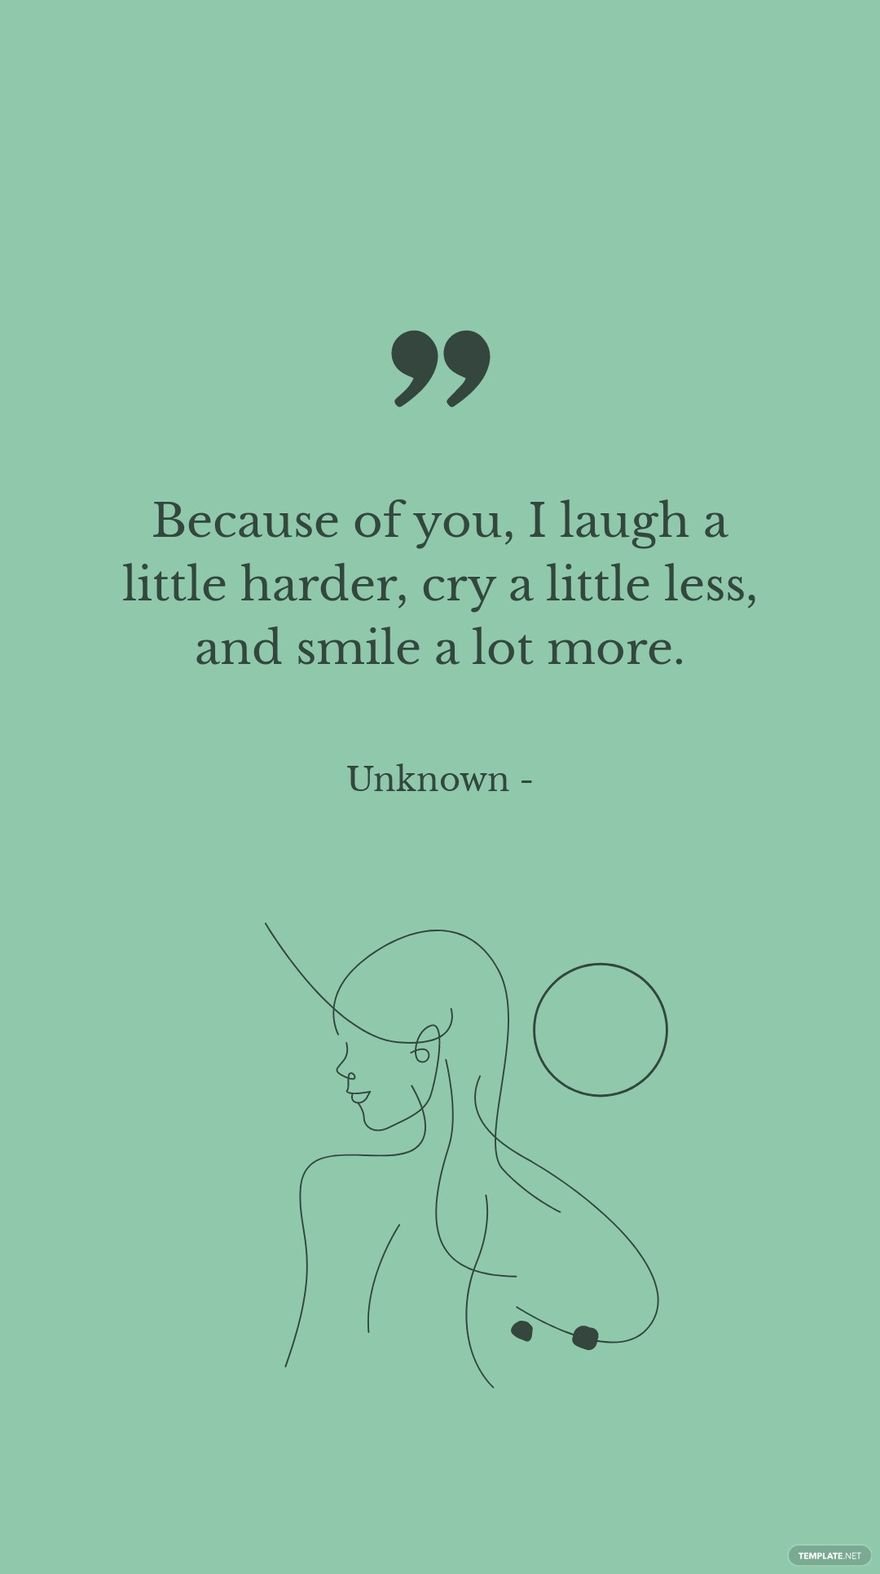 Unknown - Because of you, I laugh a little harder, cry a little less, and smile a lot more.